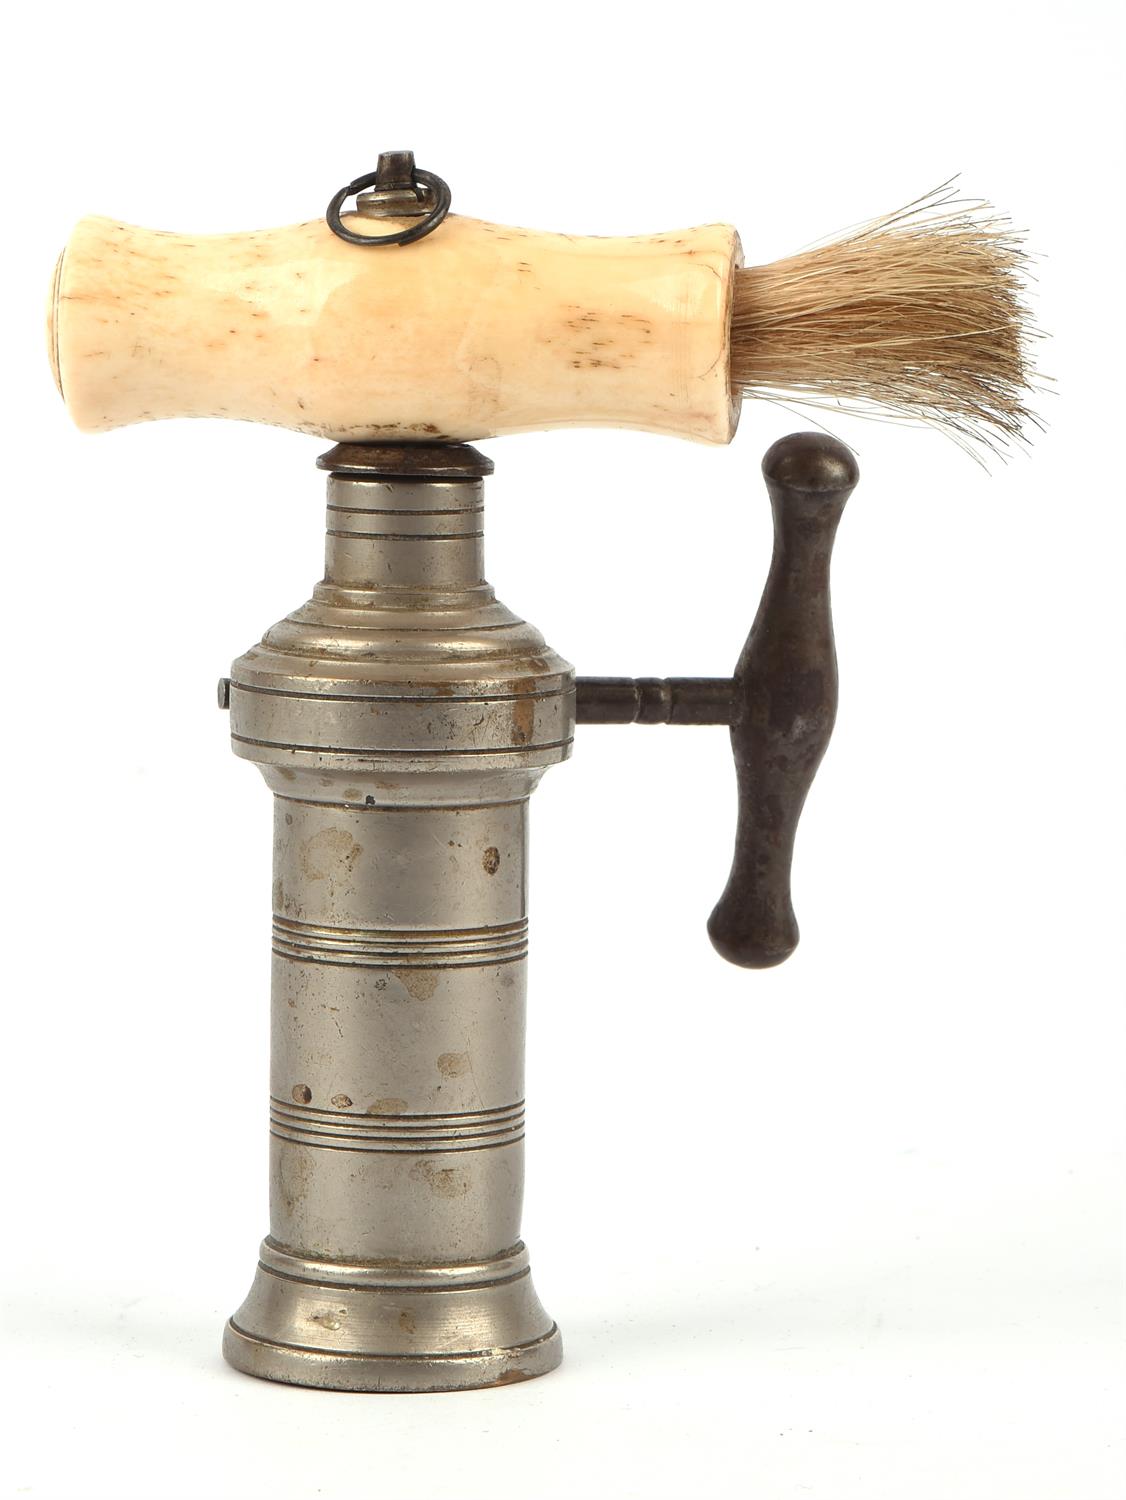 Patent corkscrew, 19th Century, with a bone handle, 26cm extended - Image 2 of 2